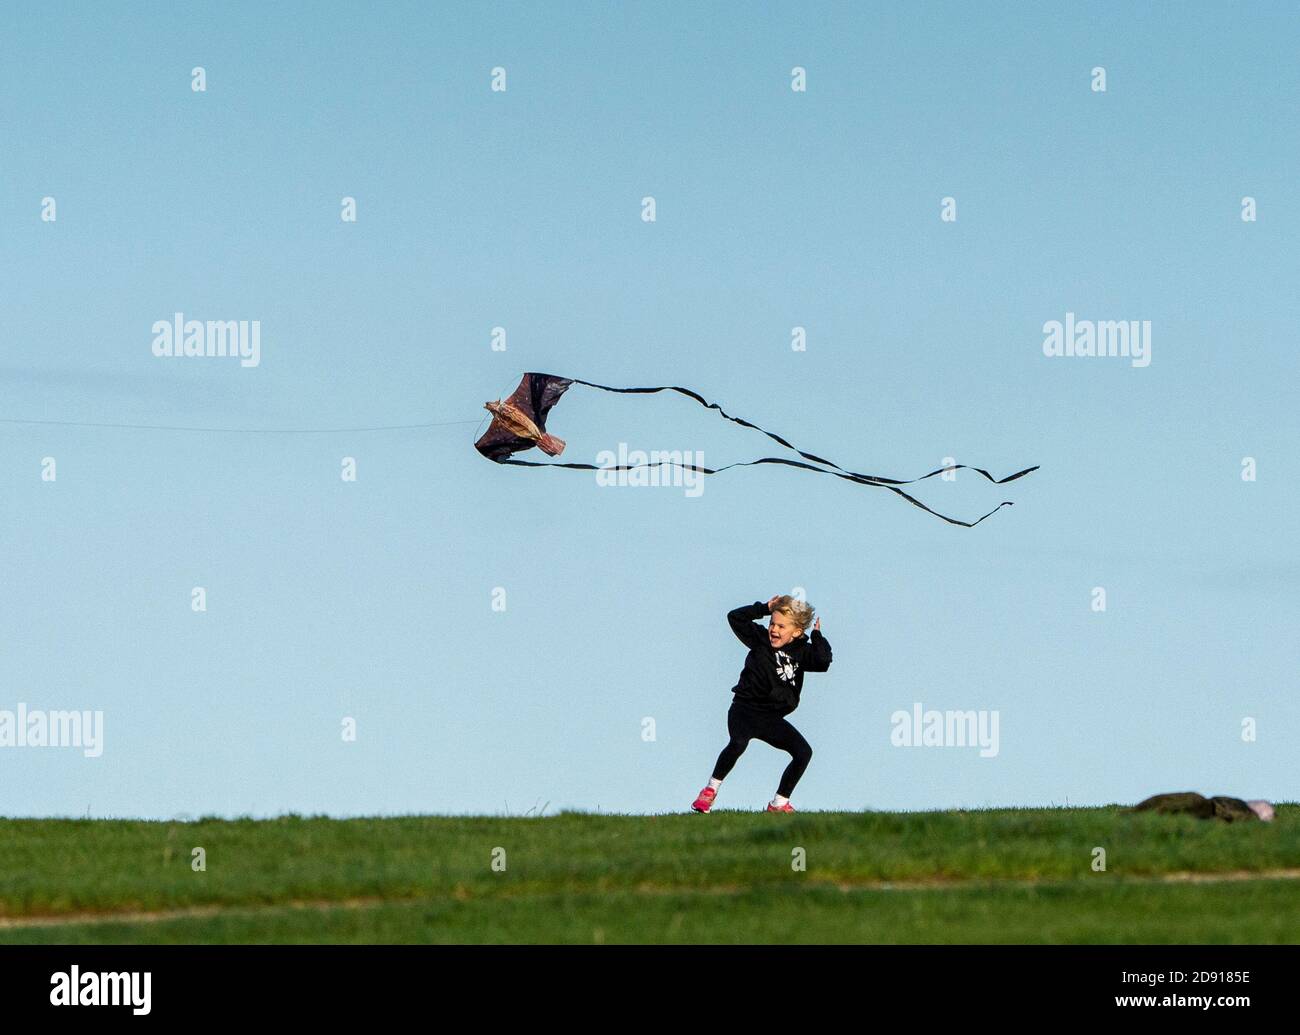 DUNSTABLE DOWNS - NOVEMBER 2: UK Weather, Windy weather was ideal today for kite flying on Dunstable Downs in Bedfordshire, on November 2, 2020. Photo by David Levenson/Alamy Live News Stock Photo